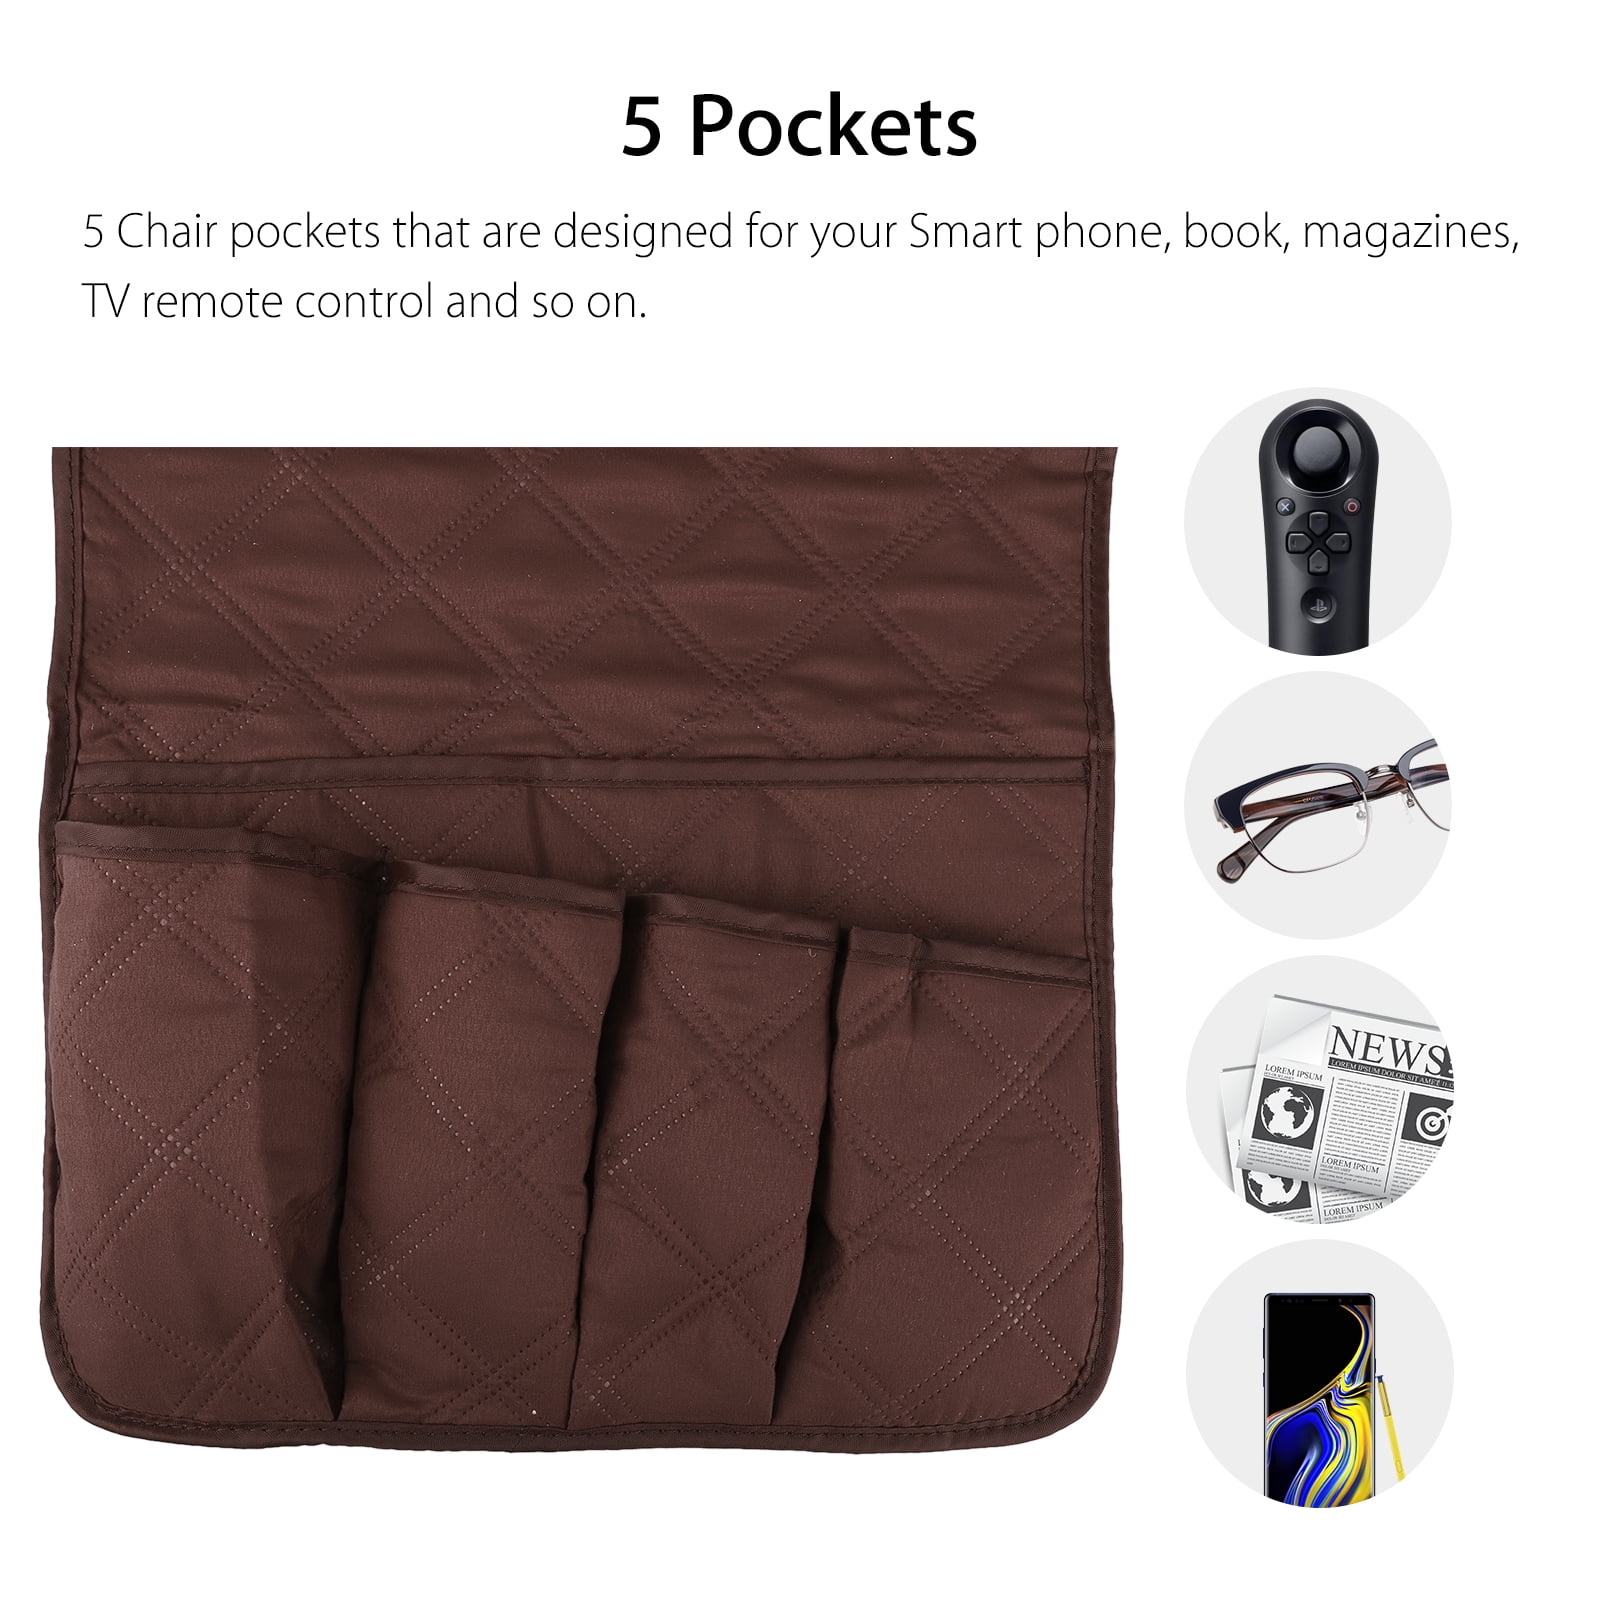 No-slip Leather Sofa Couch Remote Control Holder Chair Armrest Caddy Pocket Organizer Storage Bag for Cellphone Tablet Notepad Book Magazines Storage Pocket Bag for Tablets Magazines Phones 